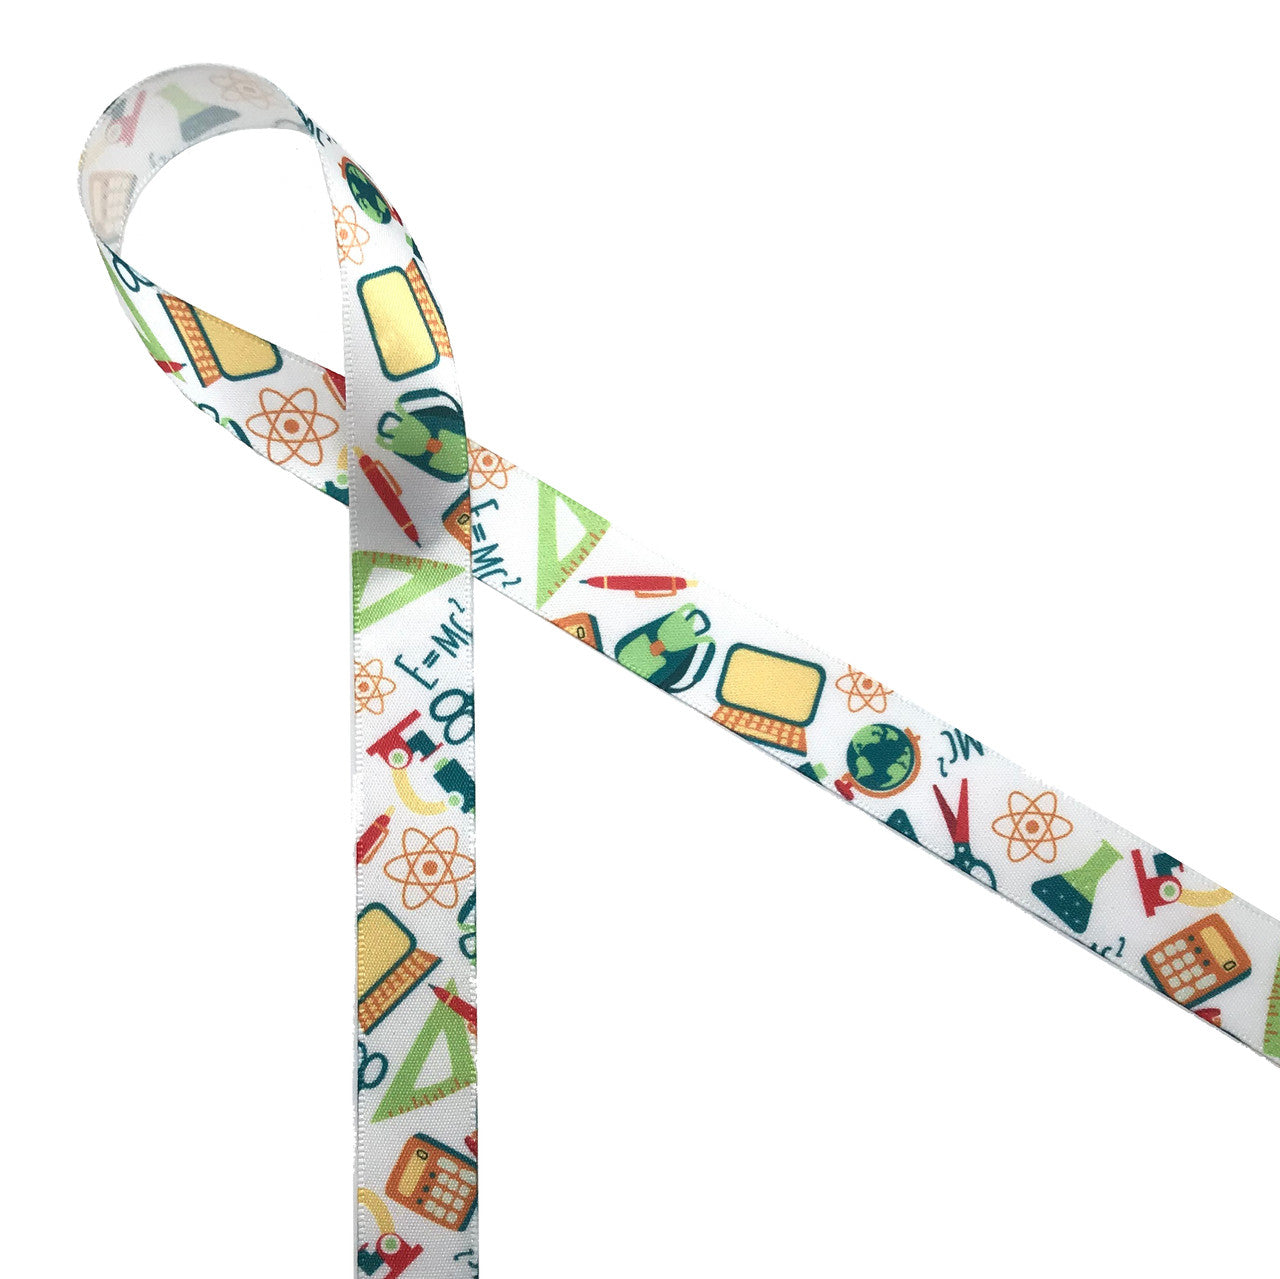 Science themed ribbon ideal for school parties, birthday parties or even corporate events! This fun ribbon features many elements of science study and work.